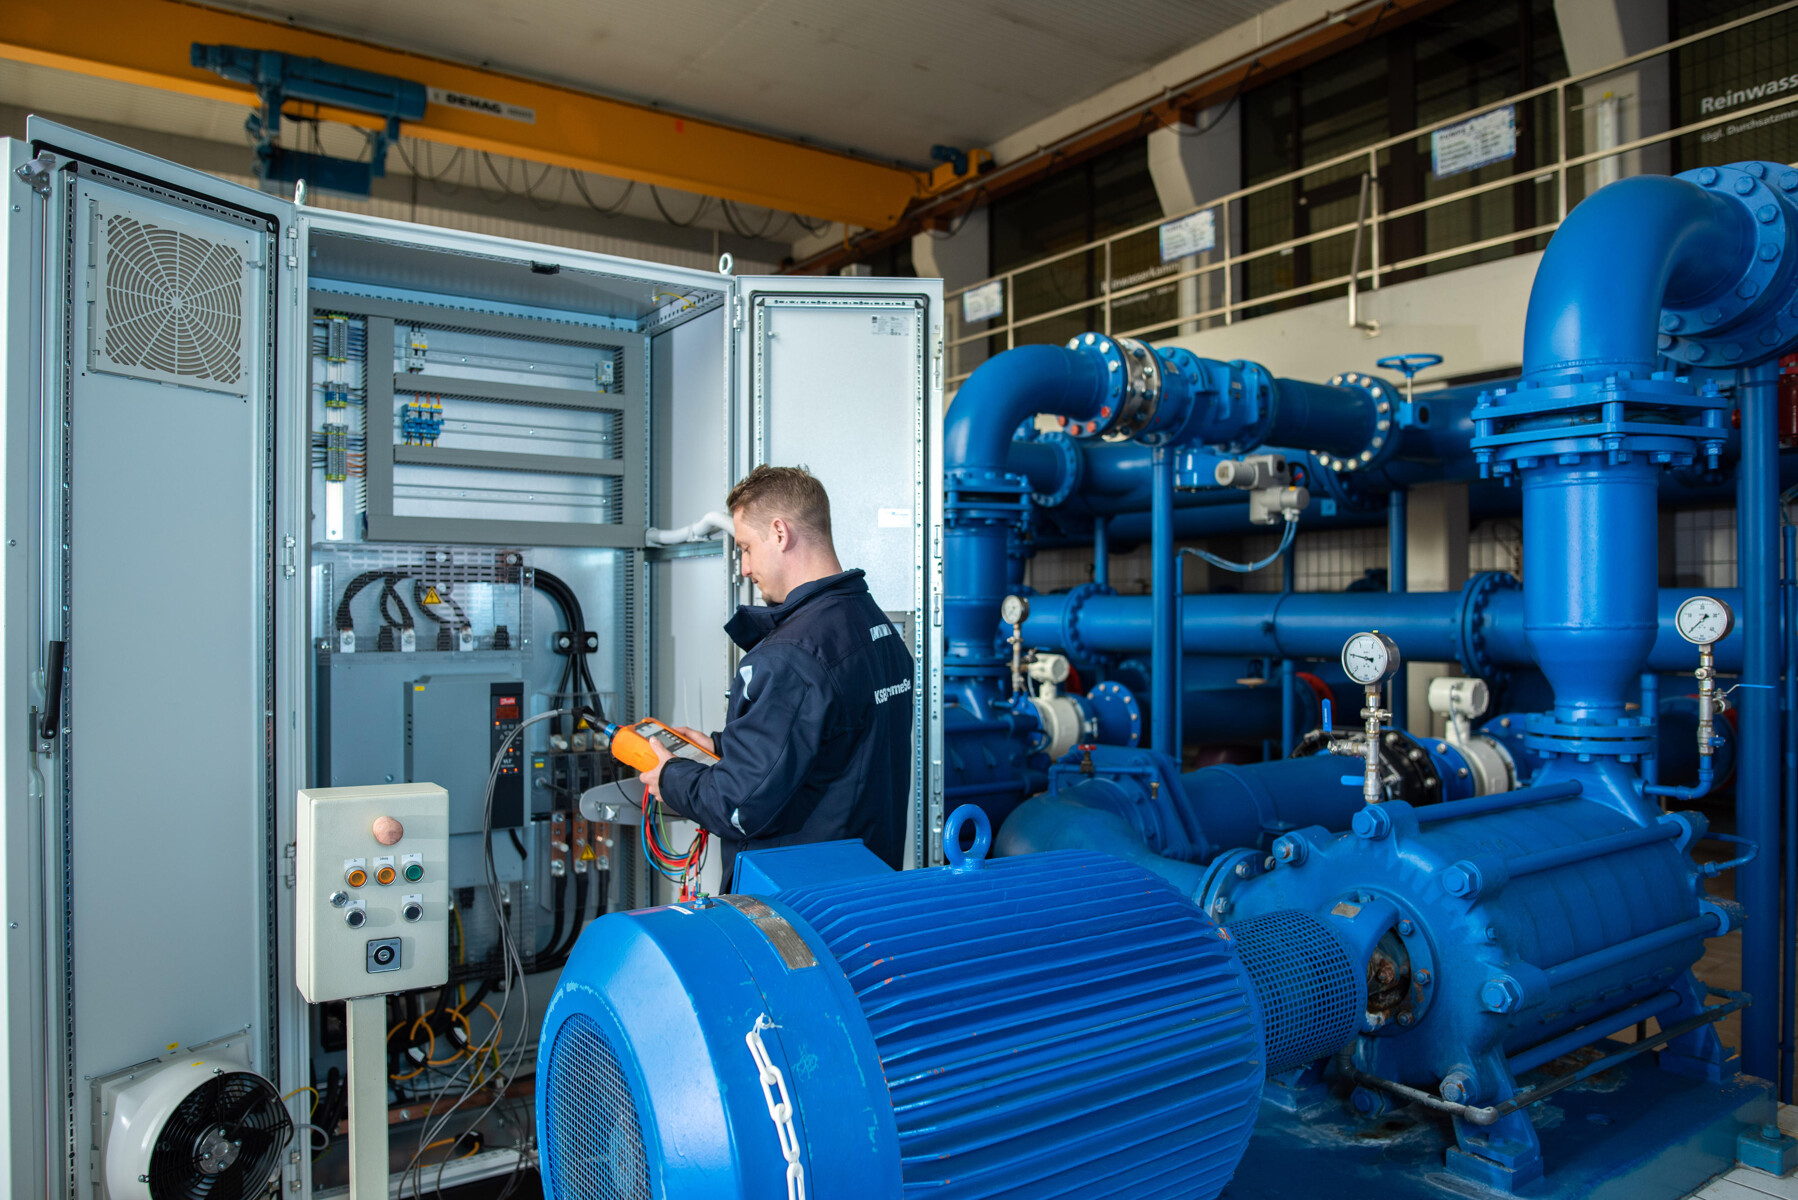 Comprehensive system analysis of a pump system for increasing efficiency.